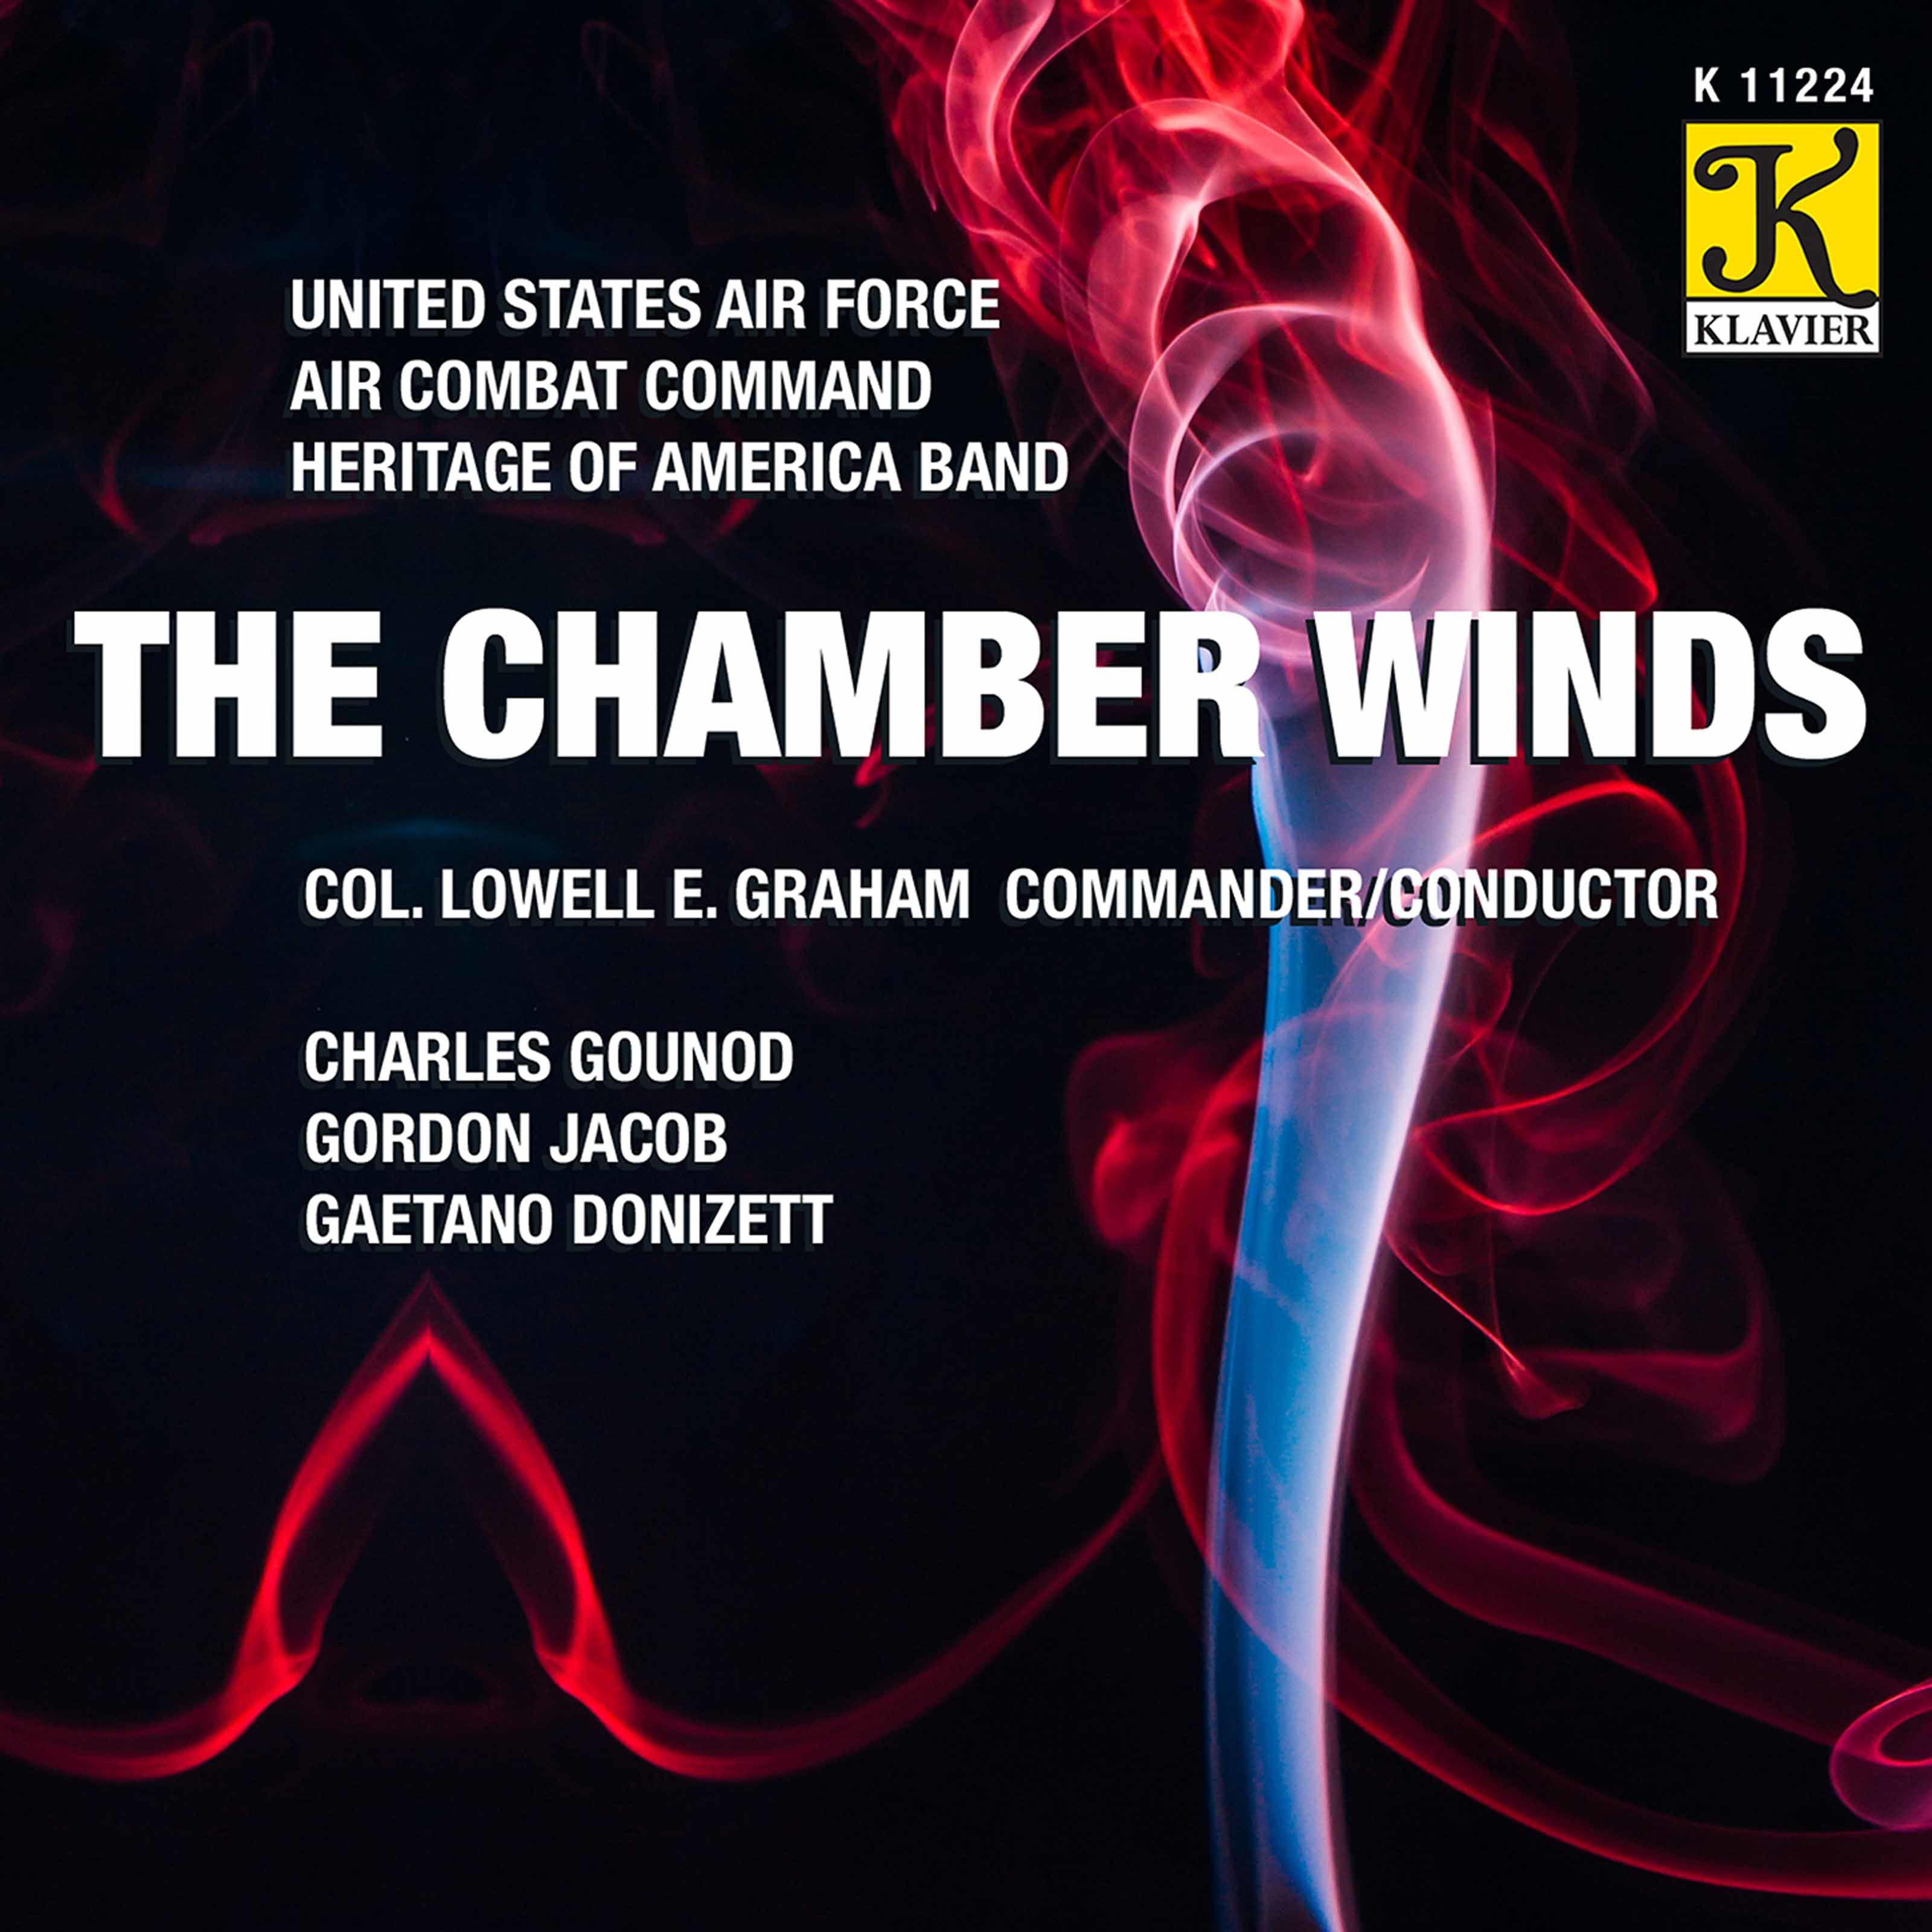 Air Combat Command Heritage of America Band, Colonel Lowell E. Graham – The Chamber Winds (2021) [FLAC 24bit/44,1kHz]